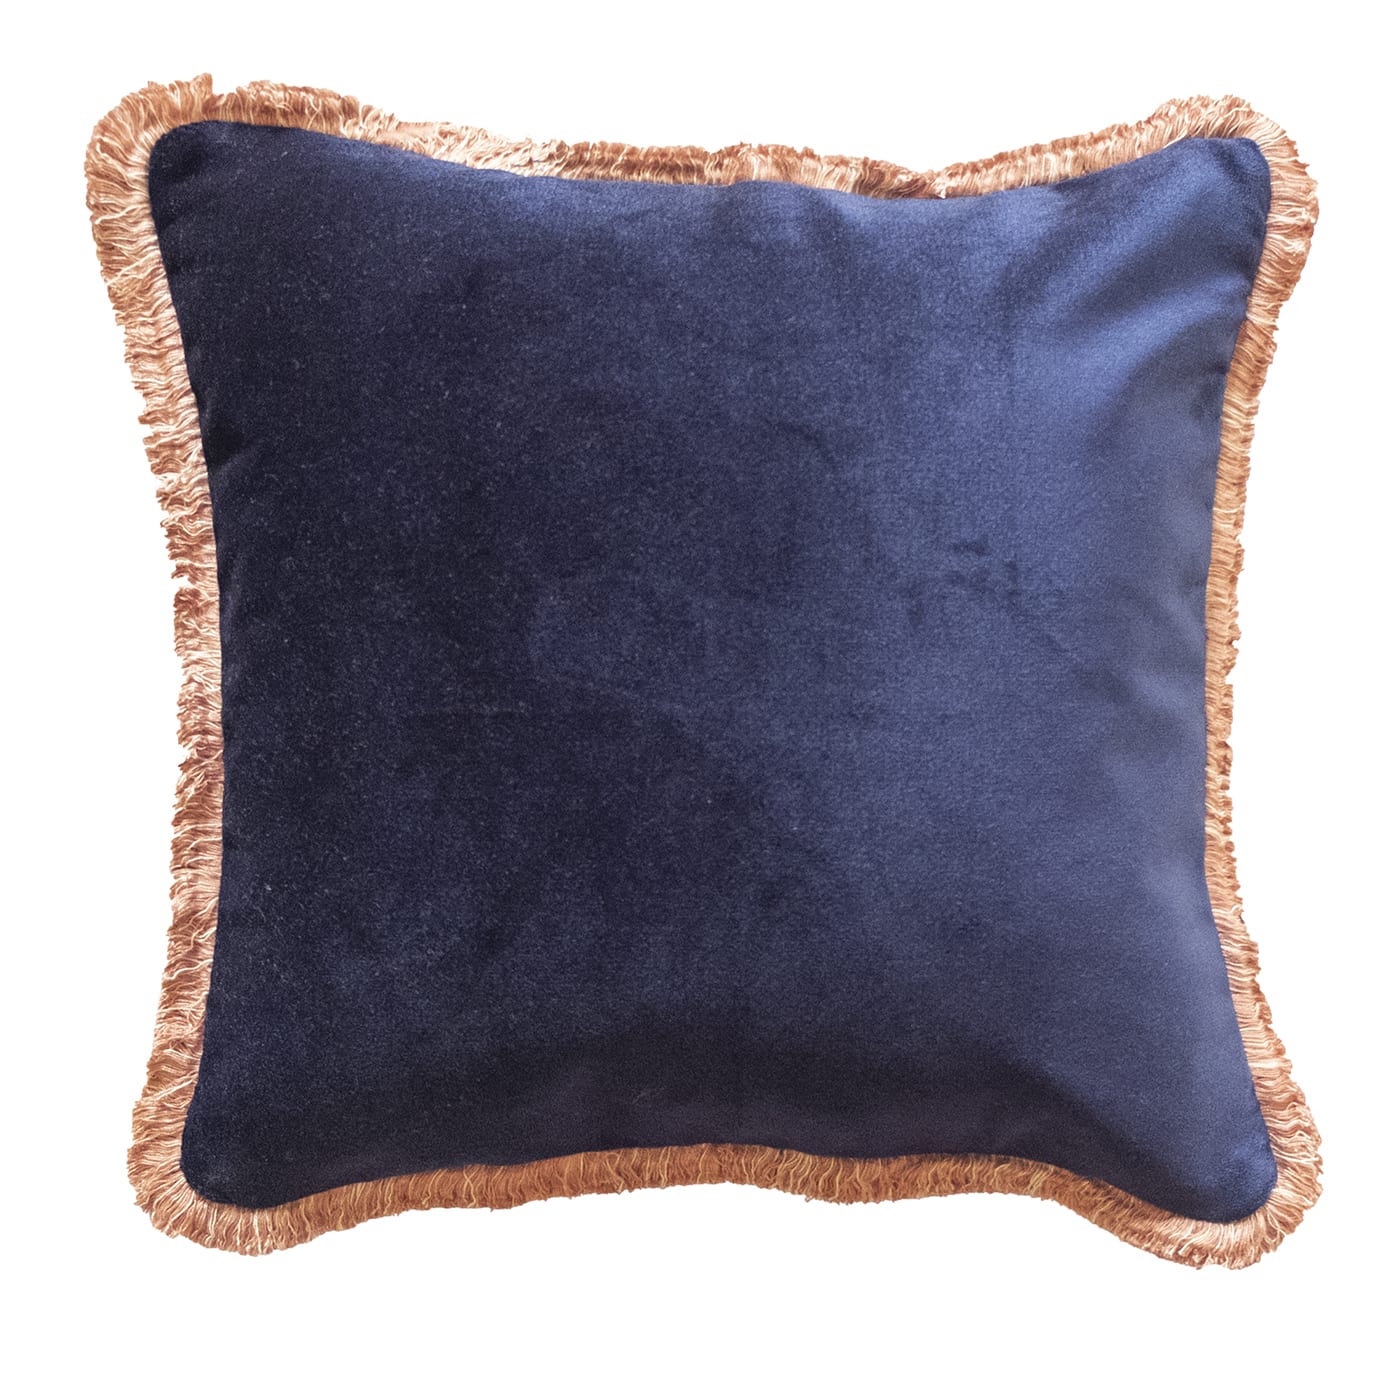 Blue Velvet Cushion Cover with Dusty-Pink Fringes - In Casa by Paboy